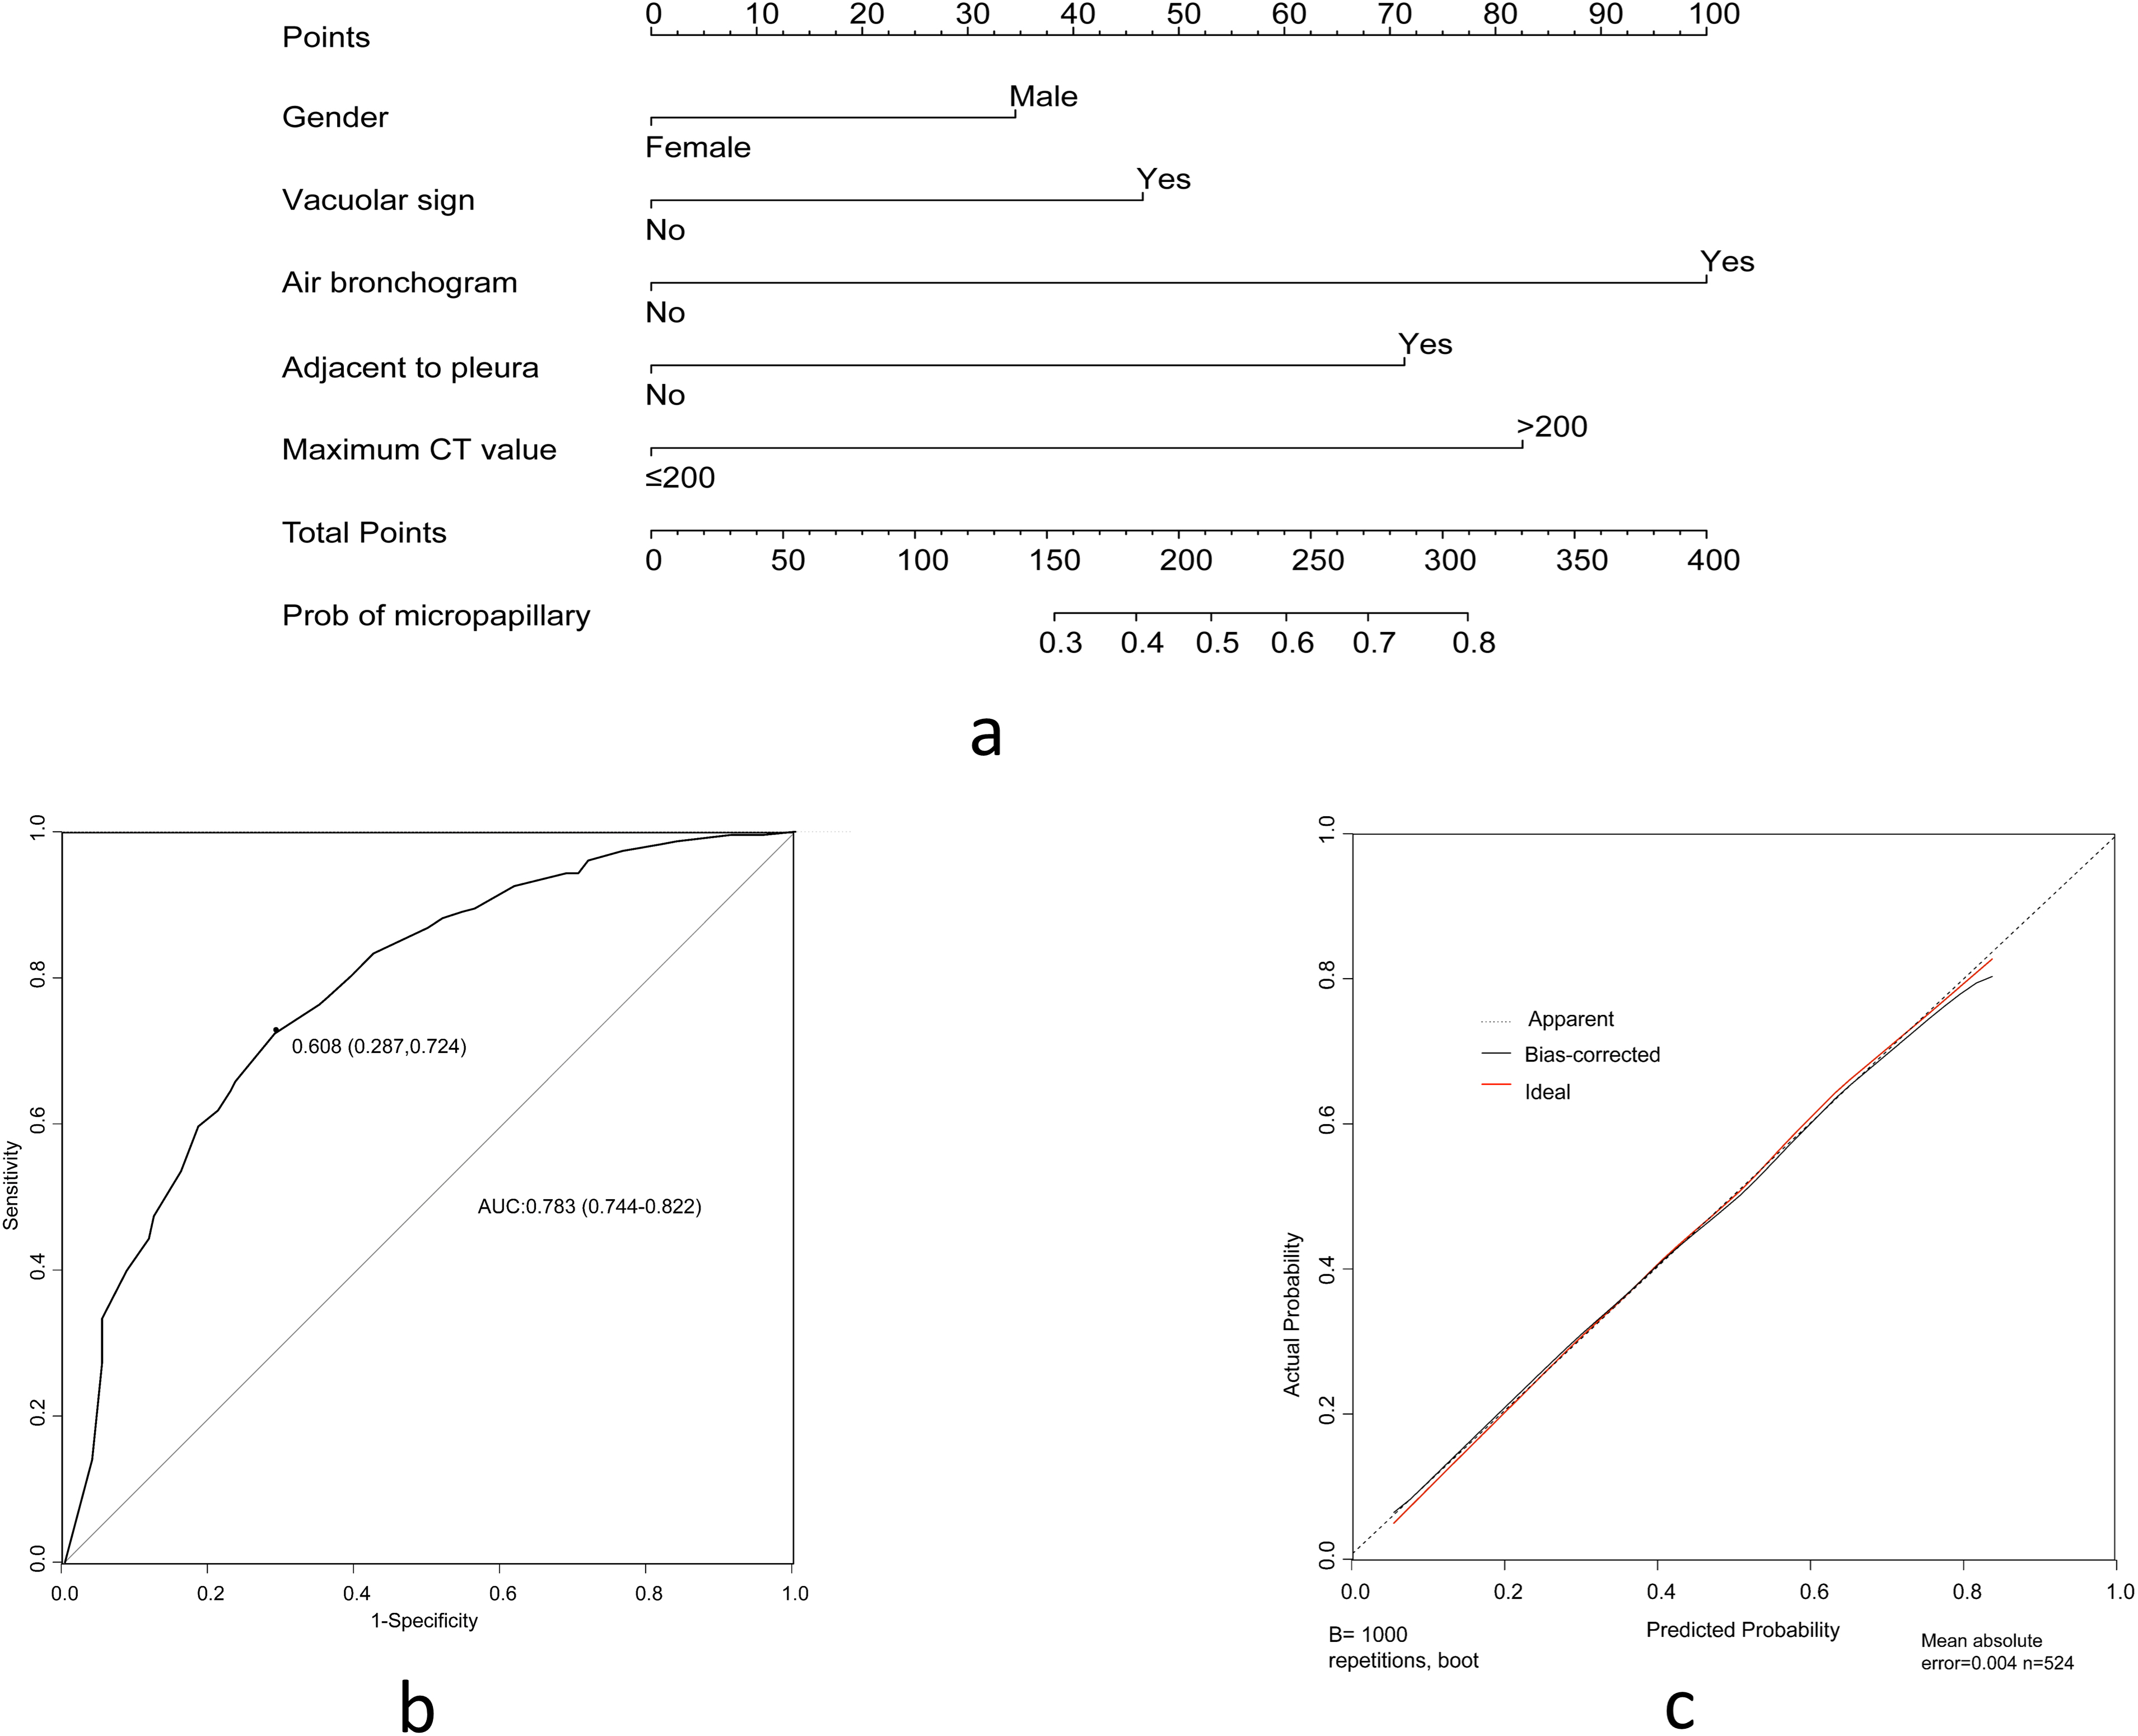 The construction and validation of a predictive nomogram based on clinical and radiological features in the training cohort. (a) The nomogram for the prediction of MPC among lung adenocarcinoma presenting as mGGO nodules. Five categorical variables from the multivariate logistic analysis were included in the model and had different contributions to the probability of MPC among mGGO nodules; (b) A ROC curve for the discriminative validation of the nomogram in the training cohort. The AUC value of the ROC curve was 0.783 (95%[CI] 0.744–0.822); (c) A calibration curve for the estimation of agreement between the predicted mGGO nodules with MPC and those of the nomogram.